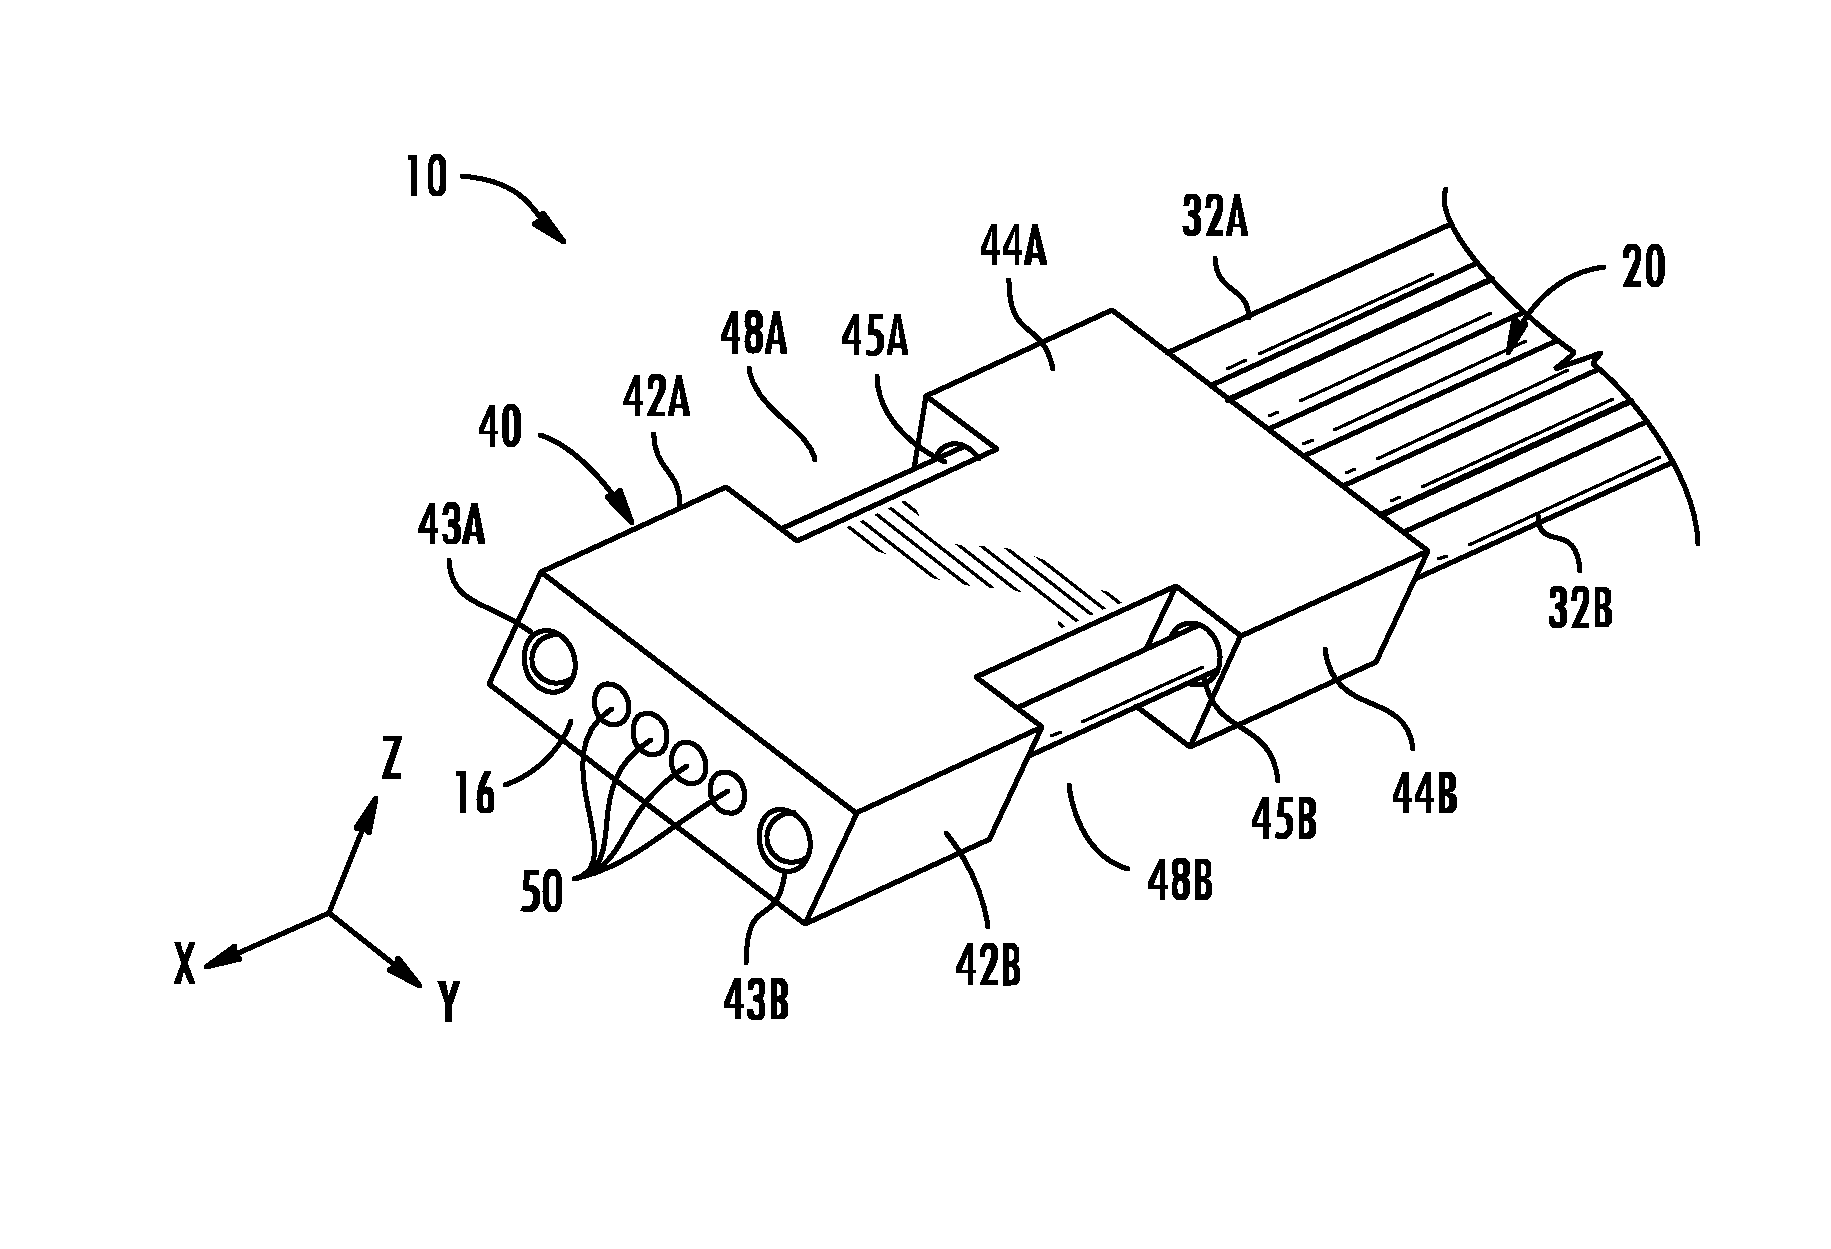 Translating lens holder assemblies employing bore relief zones, and optical connectors incorporating the same